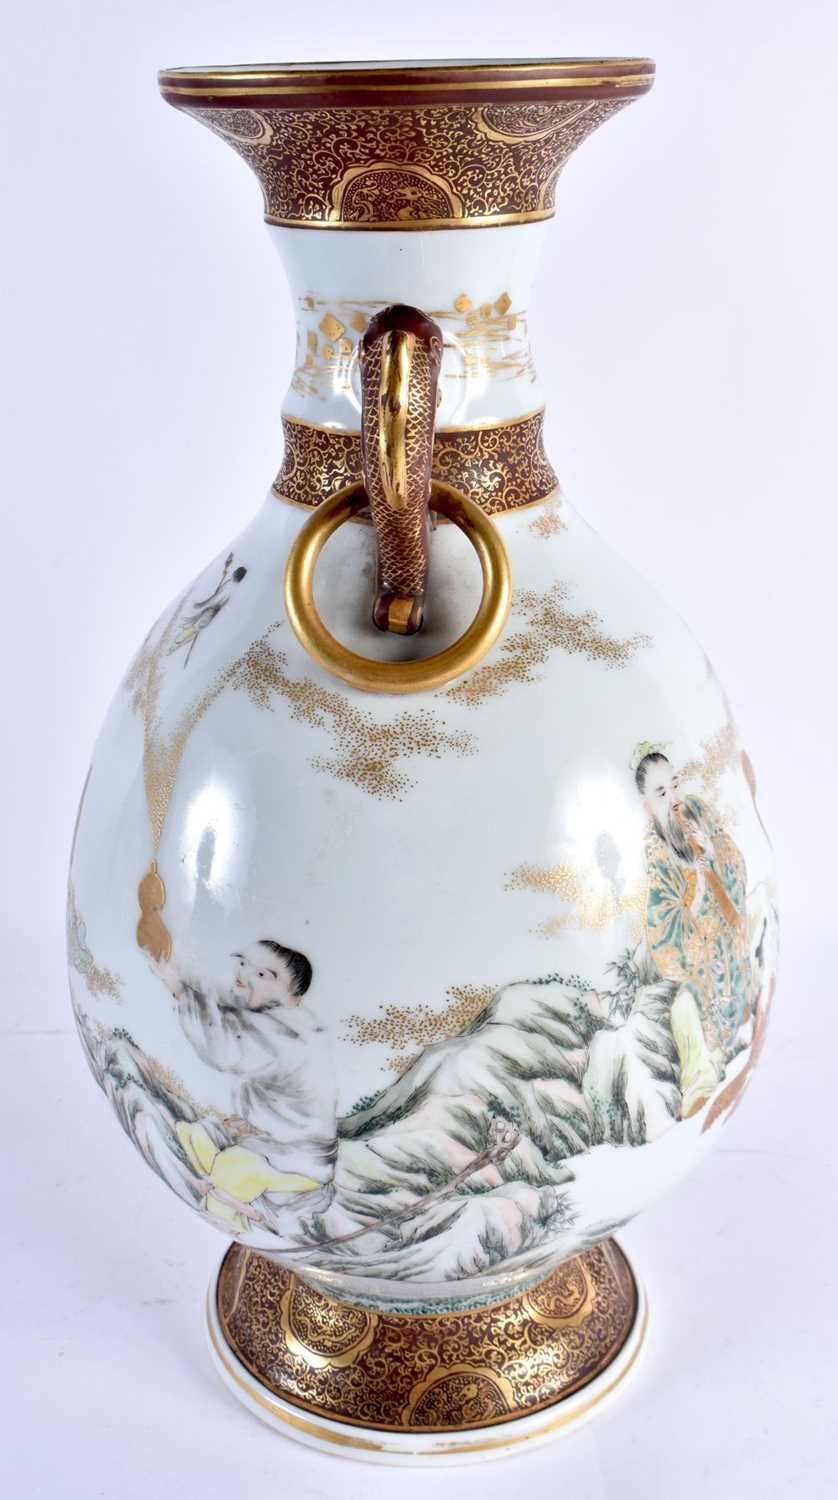 A LARGE 19TH CENTURY JAPANESE MEIJI PERIOD TWIN HANDLED KUTANI PORCELAIN VASE painted with figures - Image 4 of 21